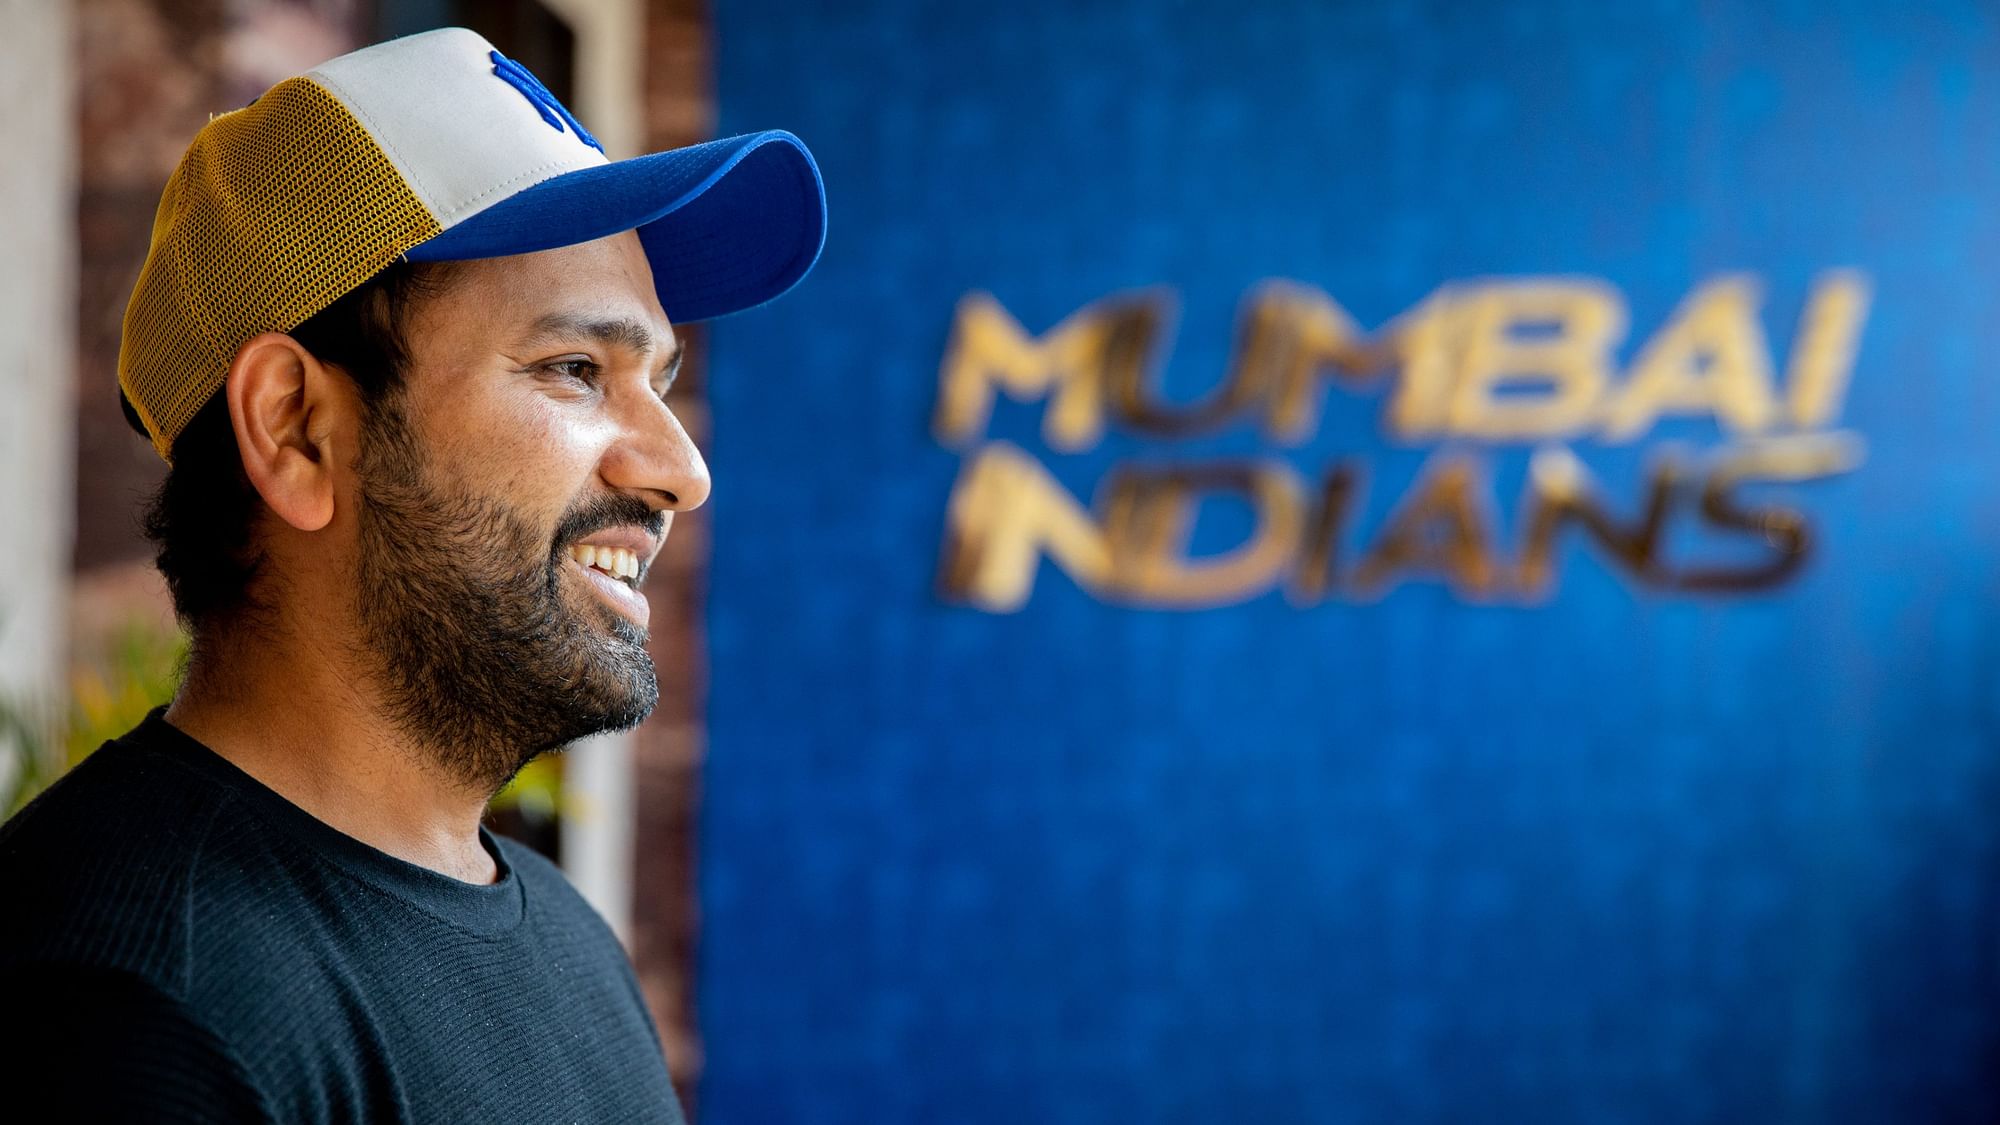 Rohit Sharma’s Mumbai Indians’ are looking to become the first IPL team to win a hat-trick of titles.